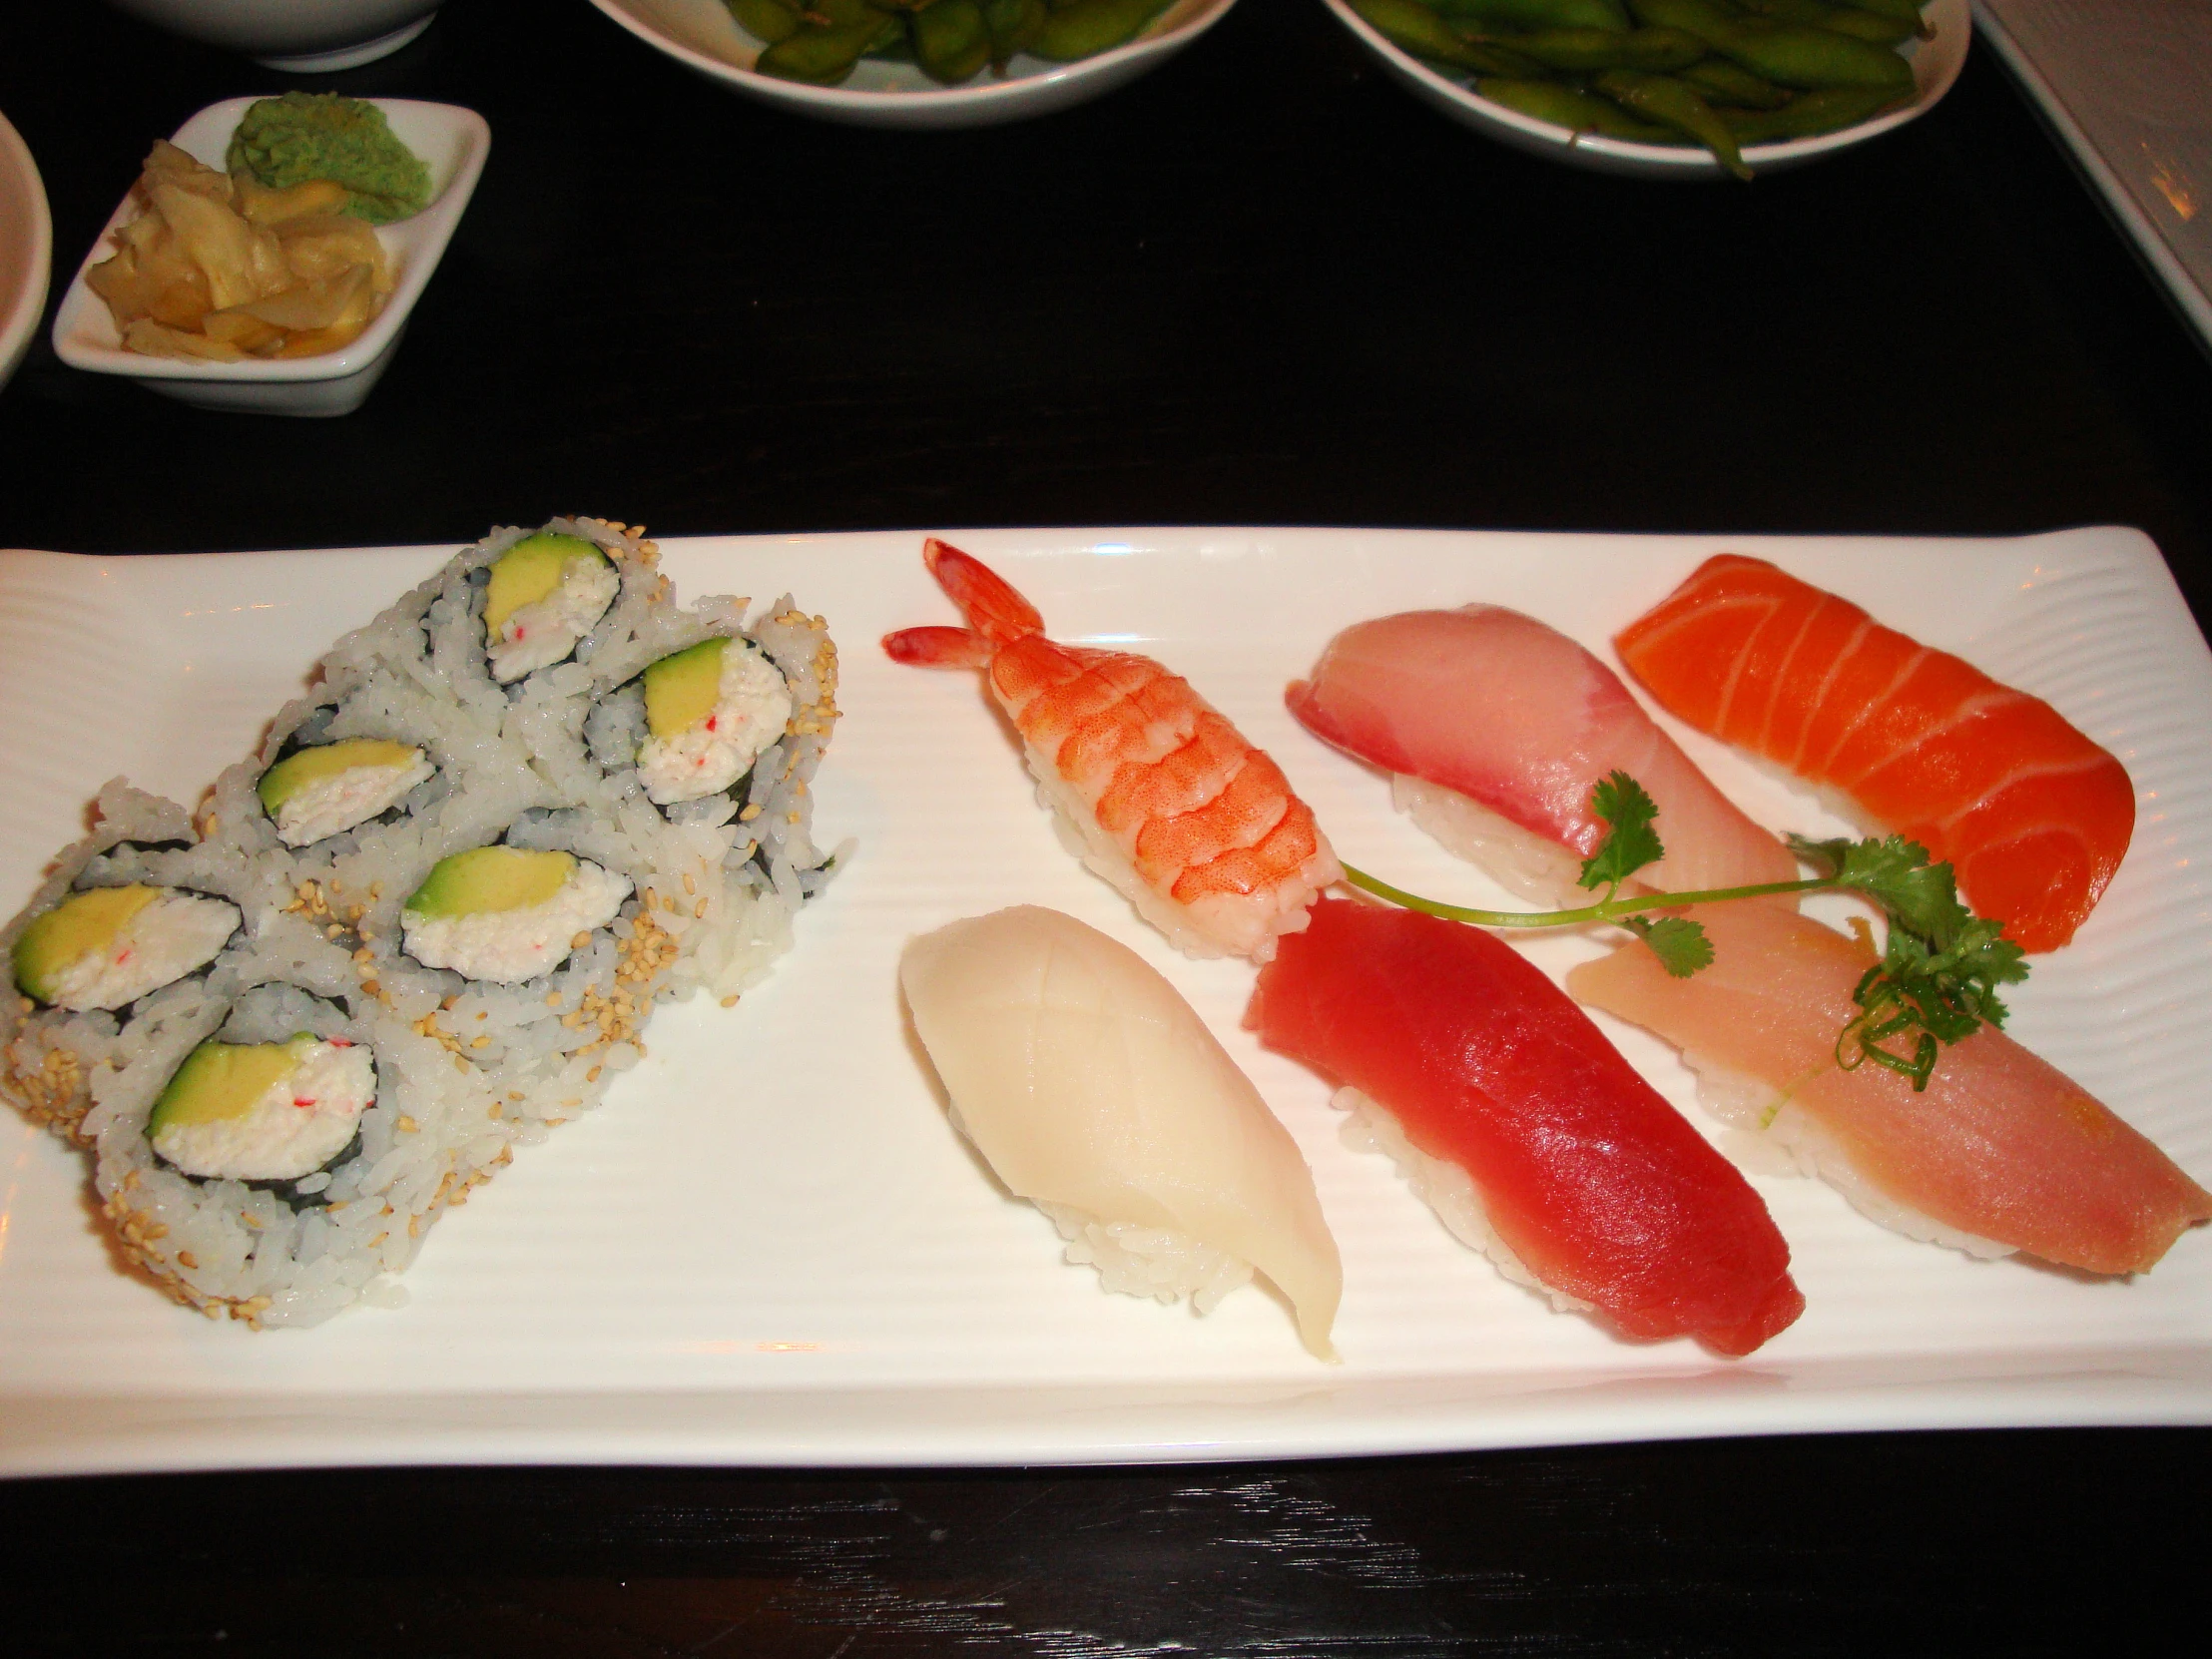 there is sushi on the plate, along with some asparagus and other vegetables